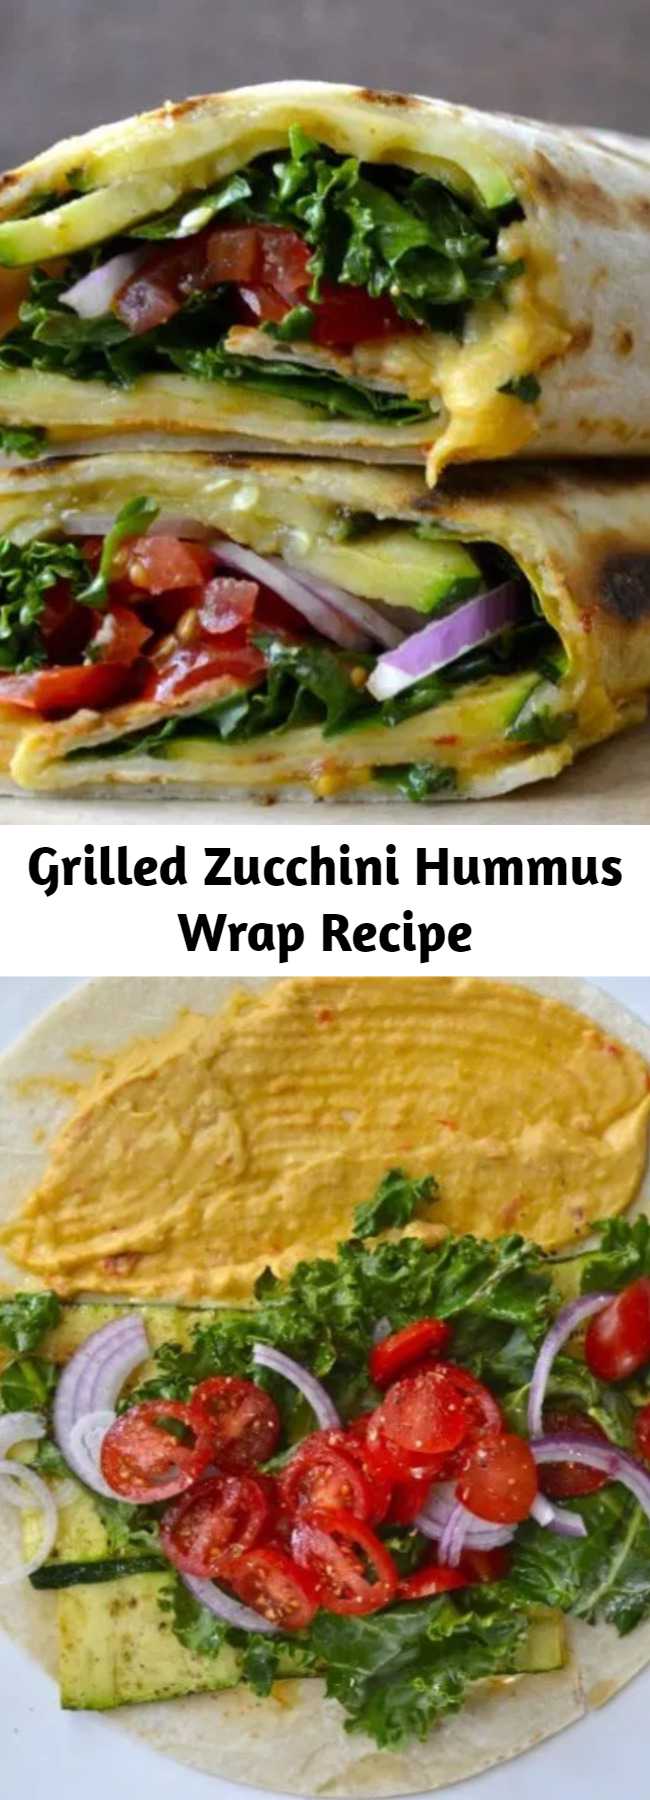 Grilled Zucchini Hummus Wrap Recipe - Fresh veggies are grilled to perfection and packed in this Grilled Zucchini Hummus Wrap! This is the perfect easy, healthy wrap recipe!